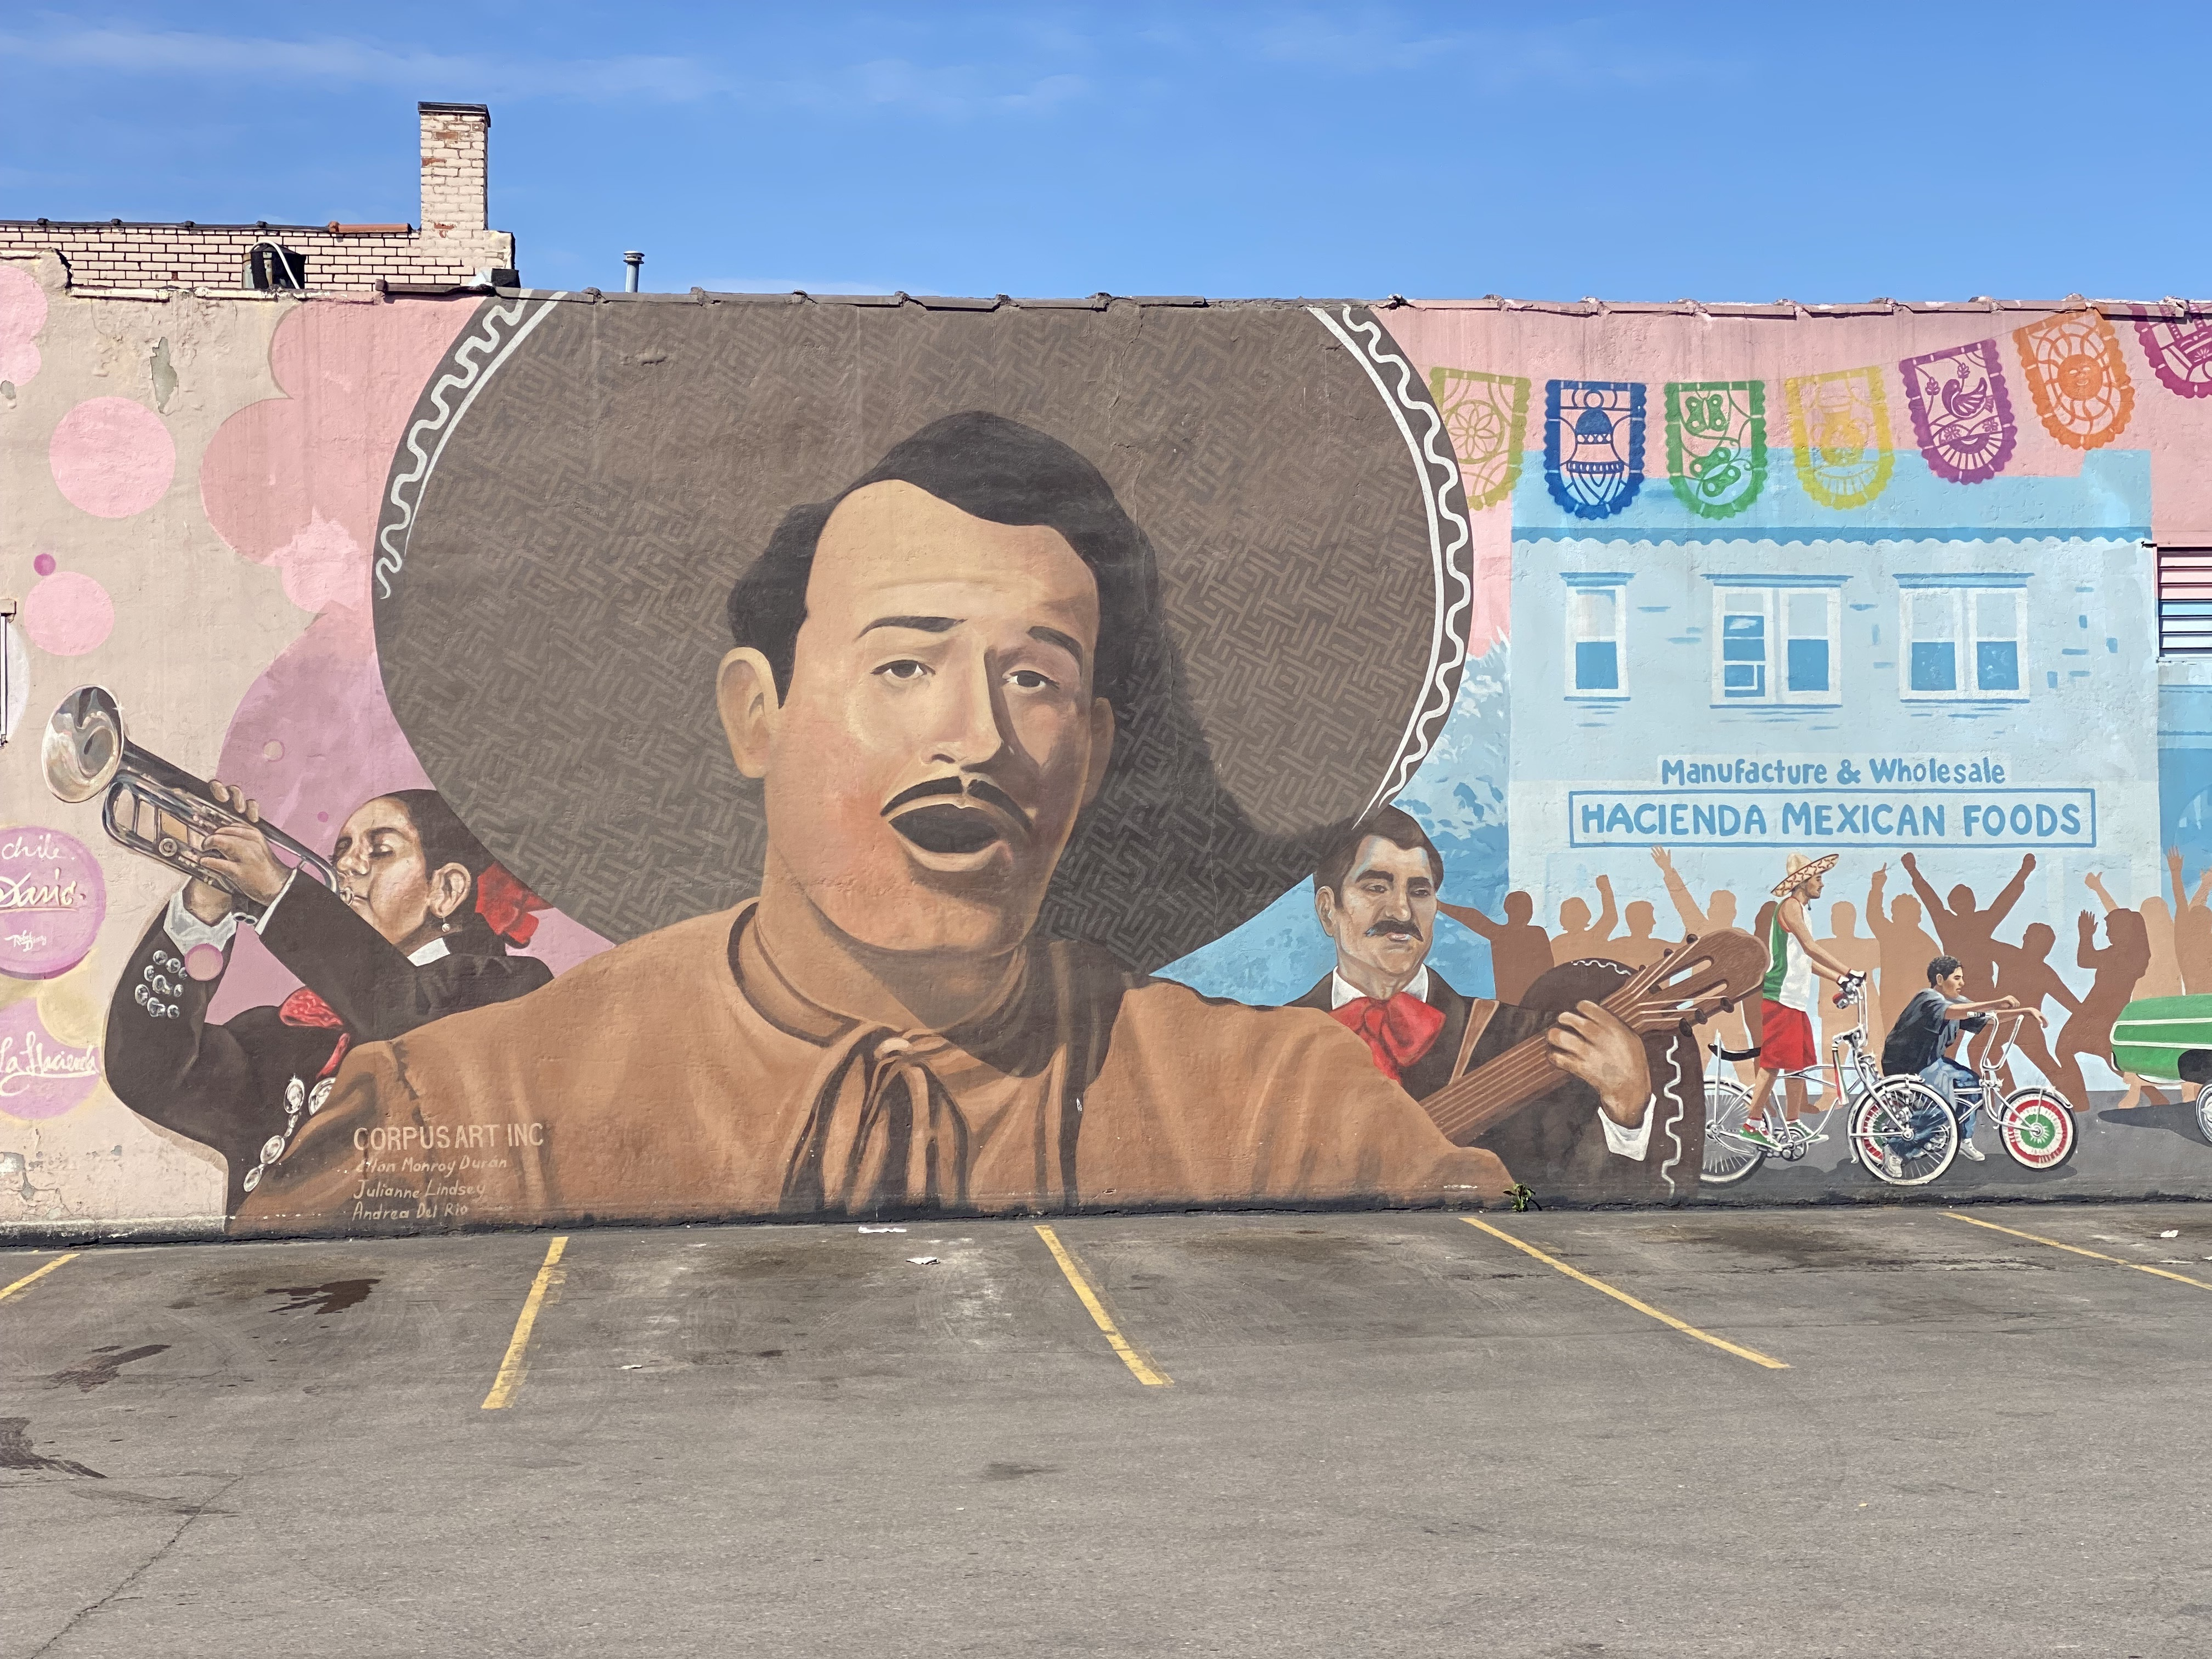 If Cinco de Mayo is about celebrating Mexican-American pride, every day is Cinco de Mayo in Southwest Detroit